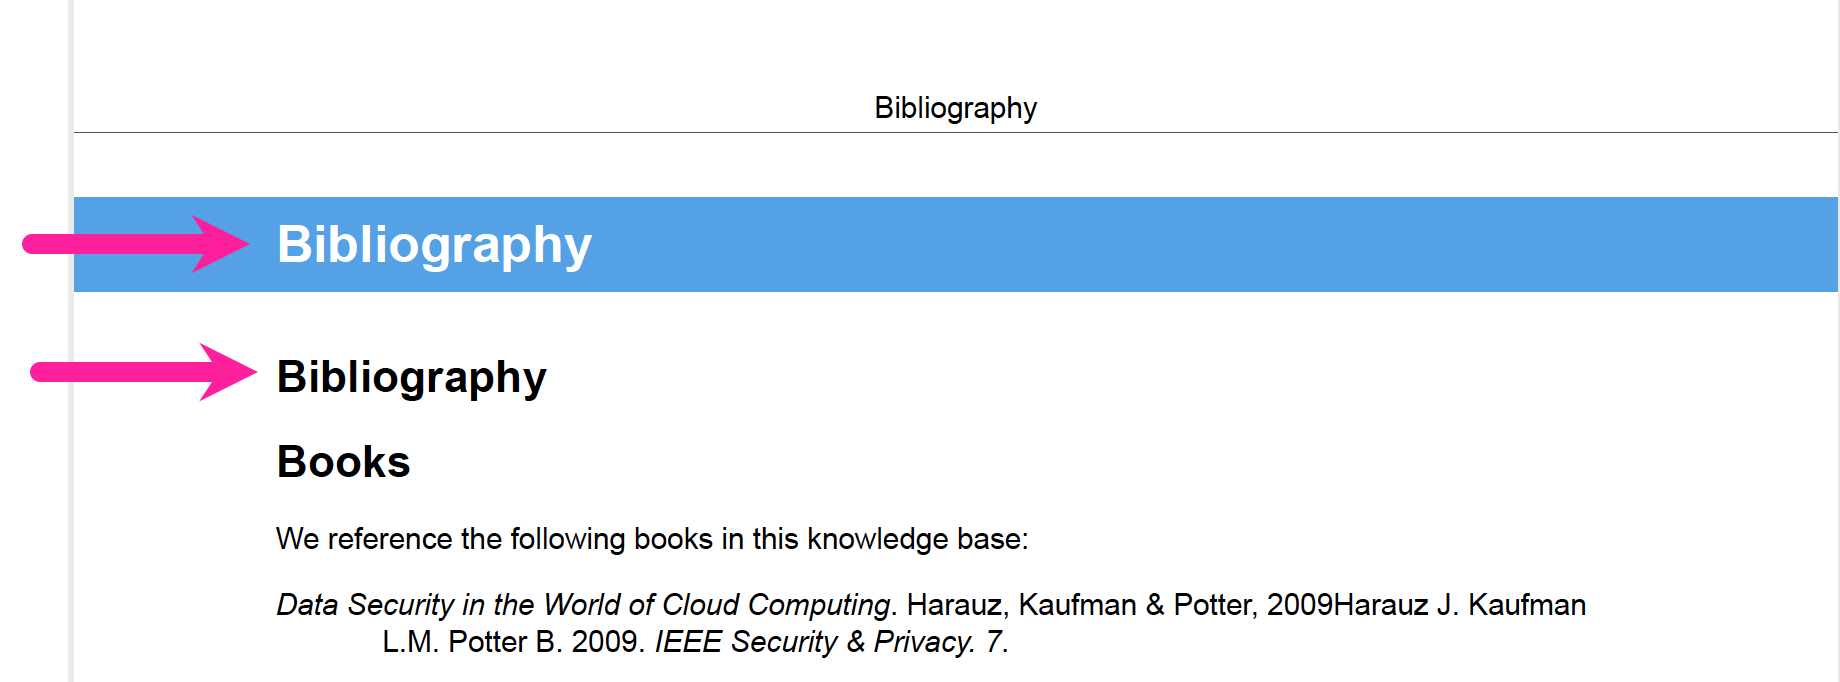 A topic with the title "Bibliography". Inside the topic, there is a second title "Bibliography" and this is an auto-generated title.